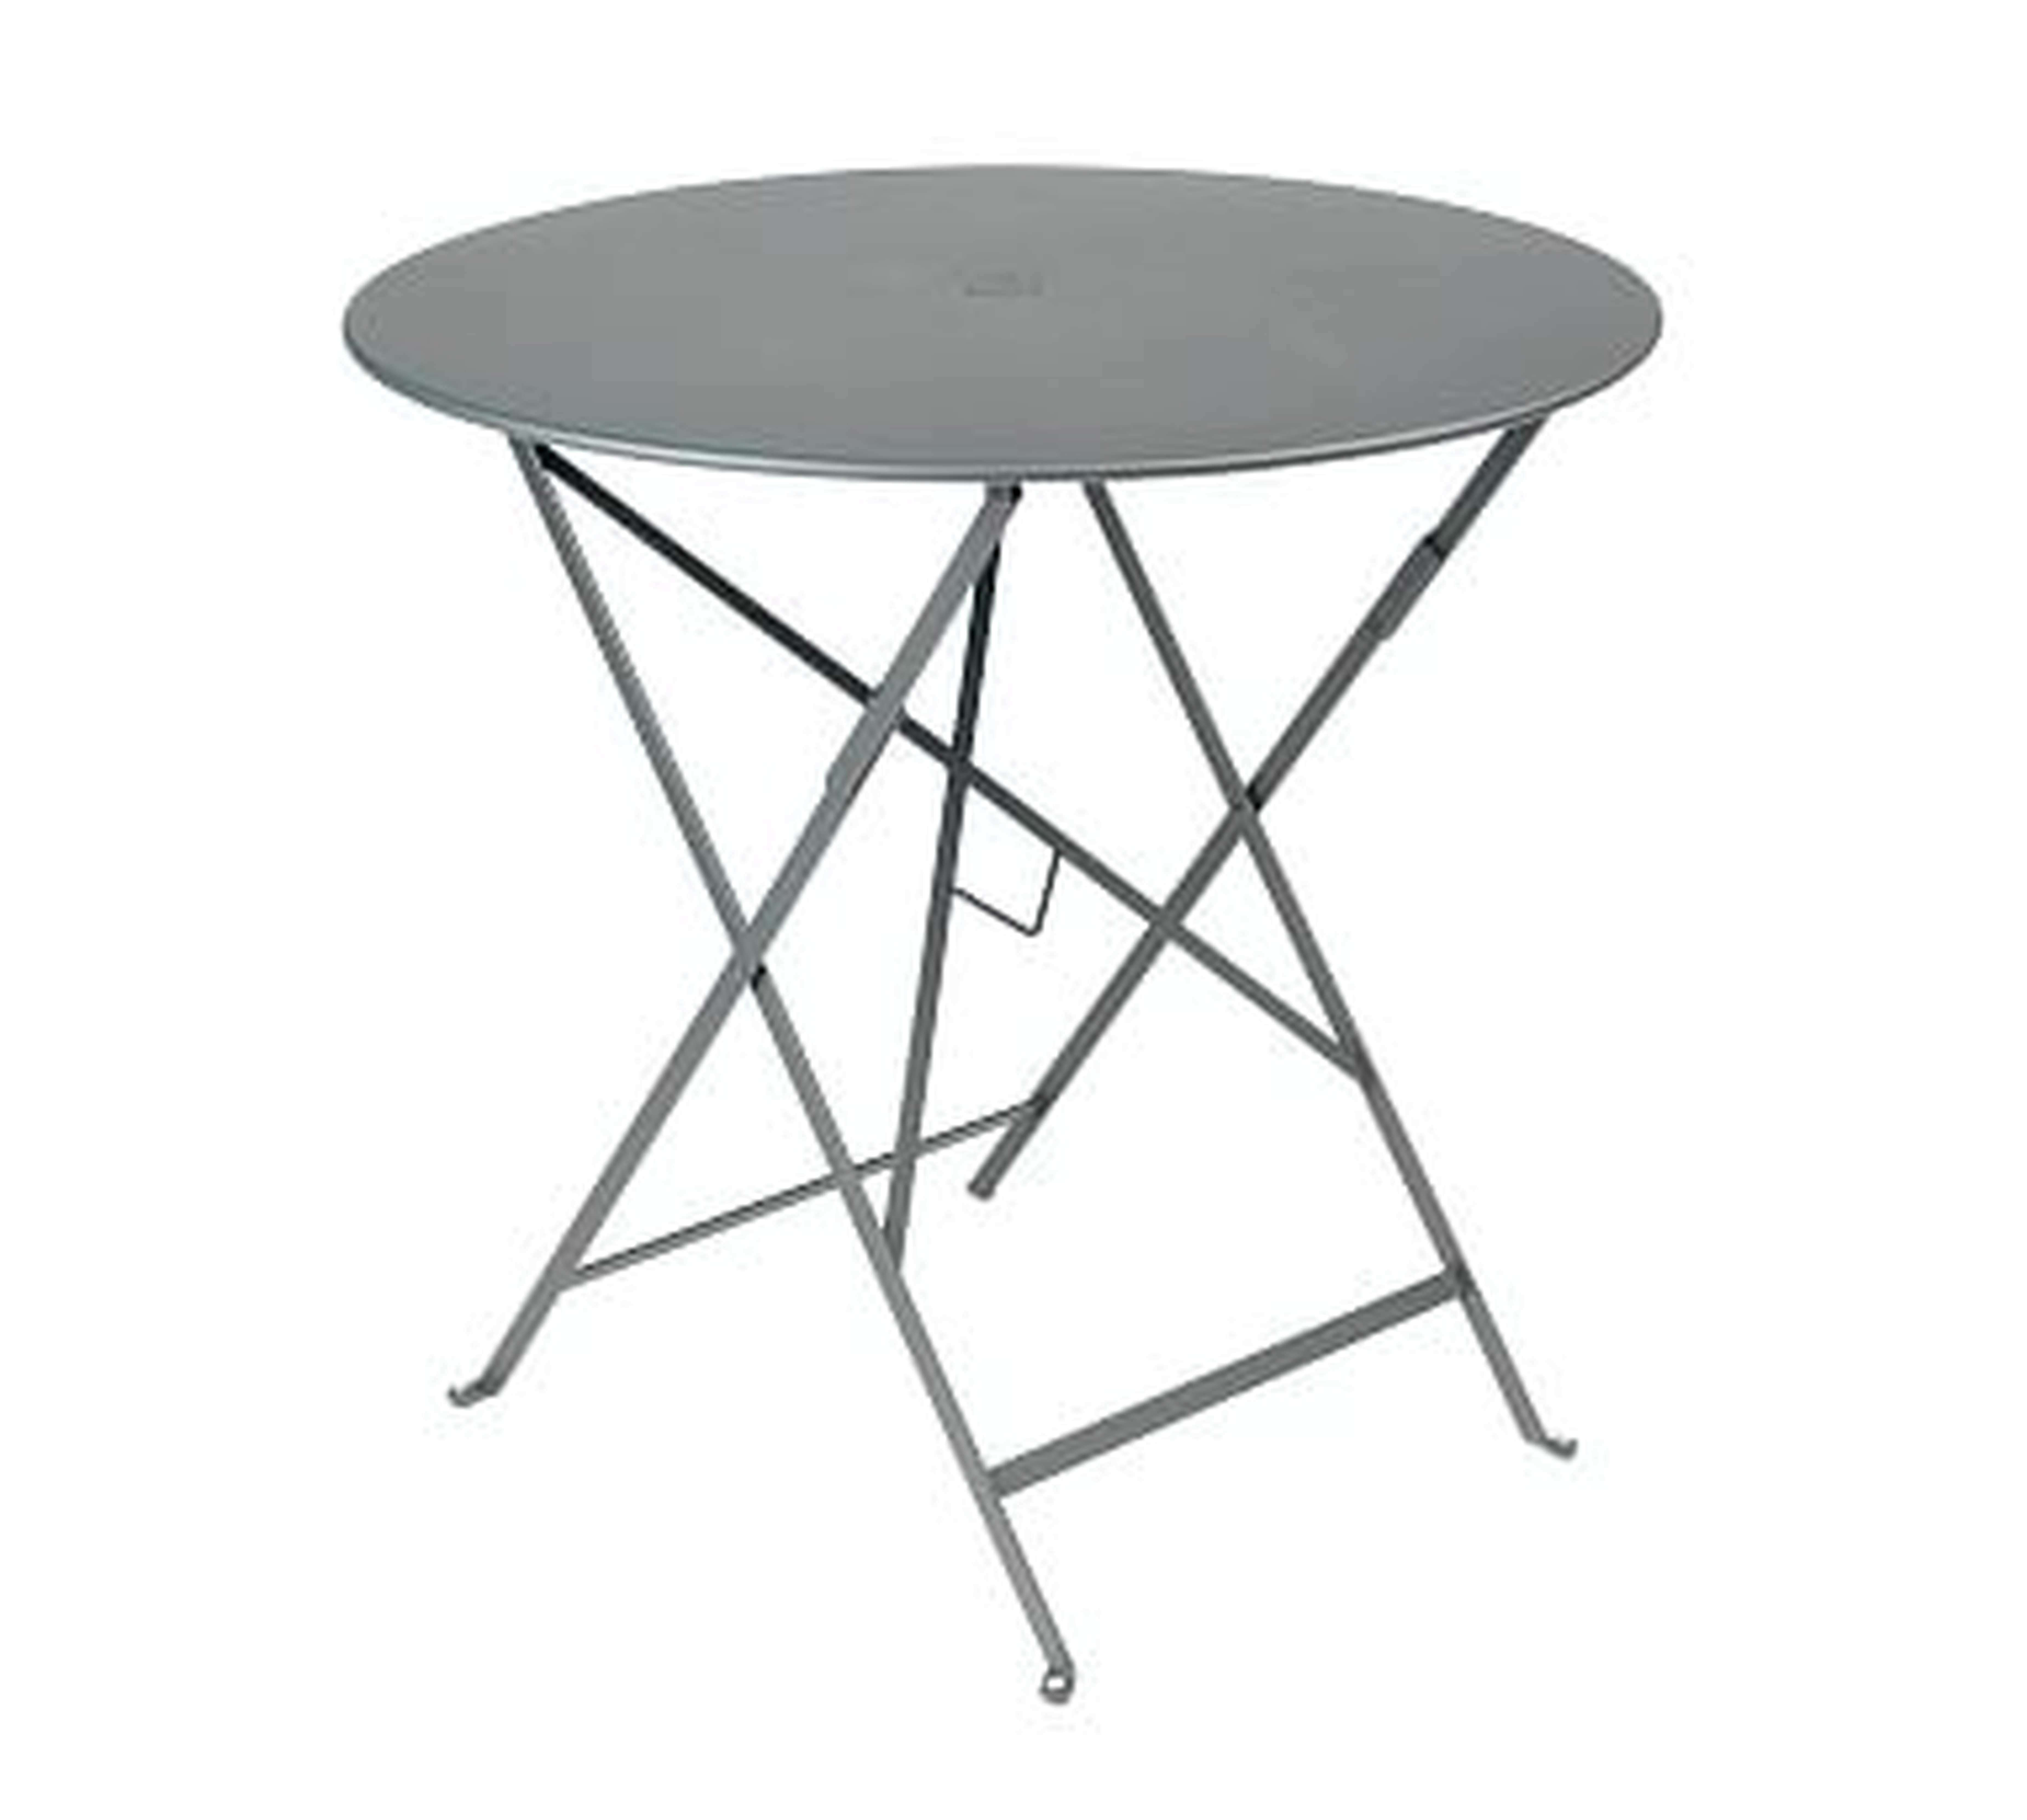 Fermob Bistro 30" Round Table, Storm Gray - Pottery Barn